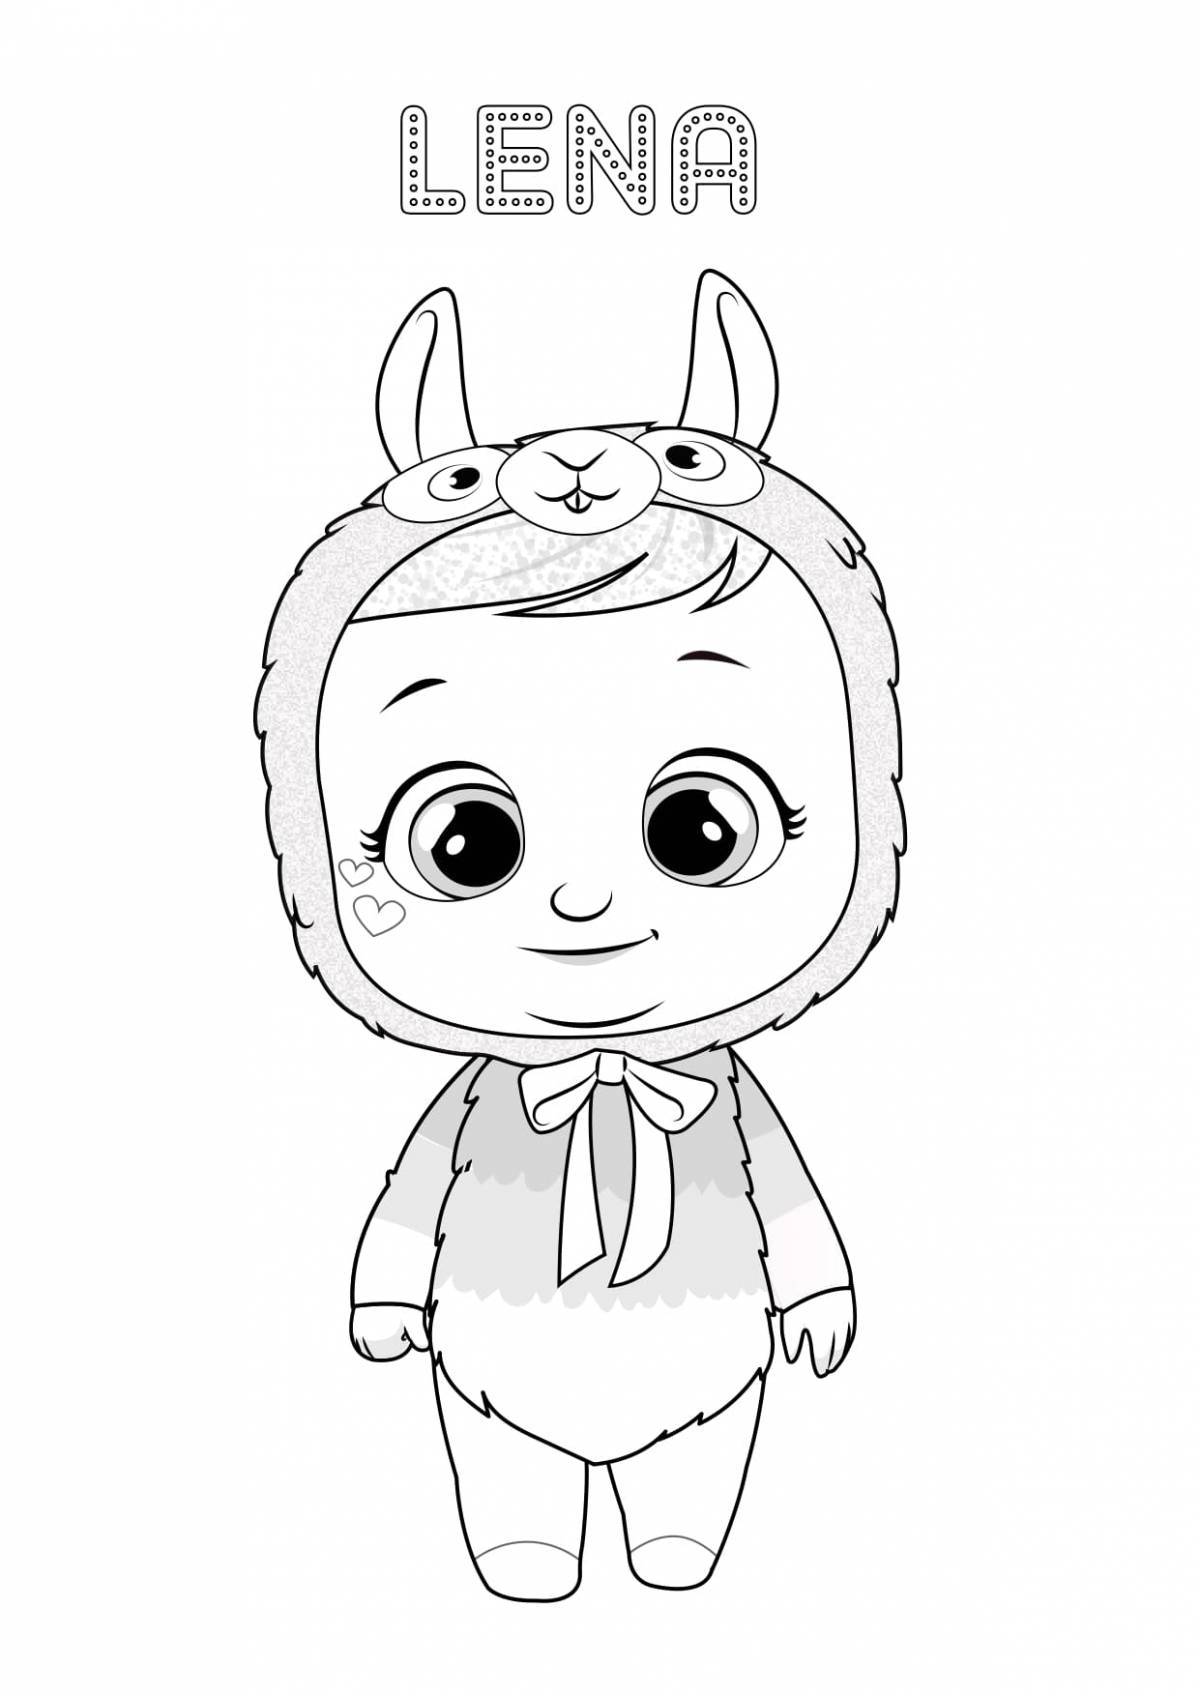 Lovely edge baby coloring page